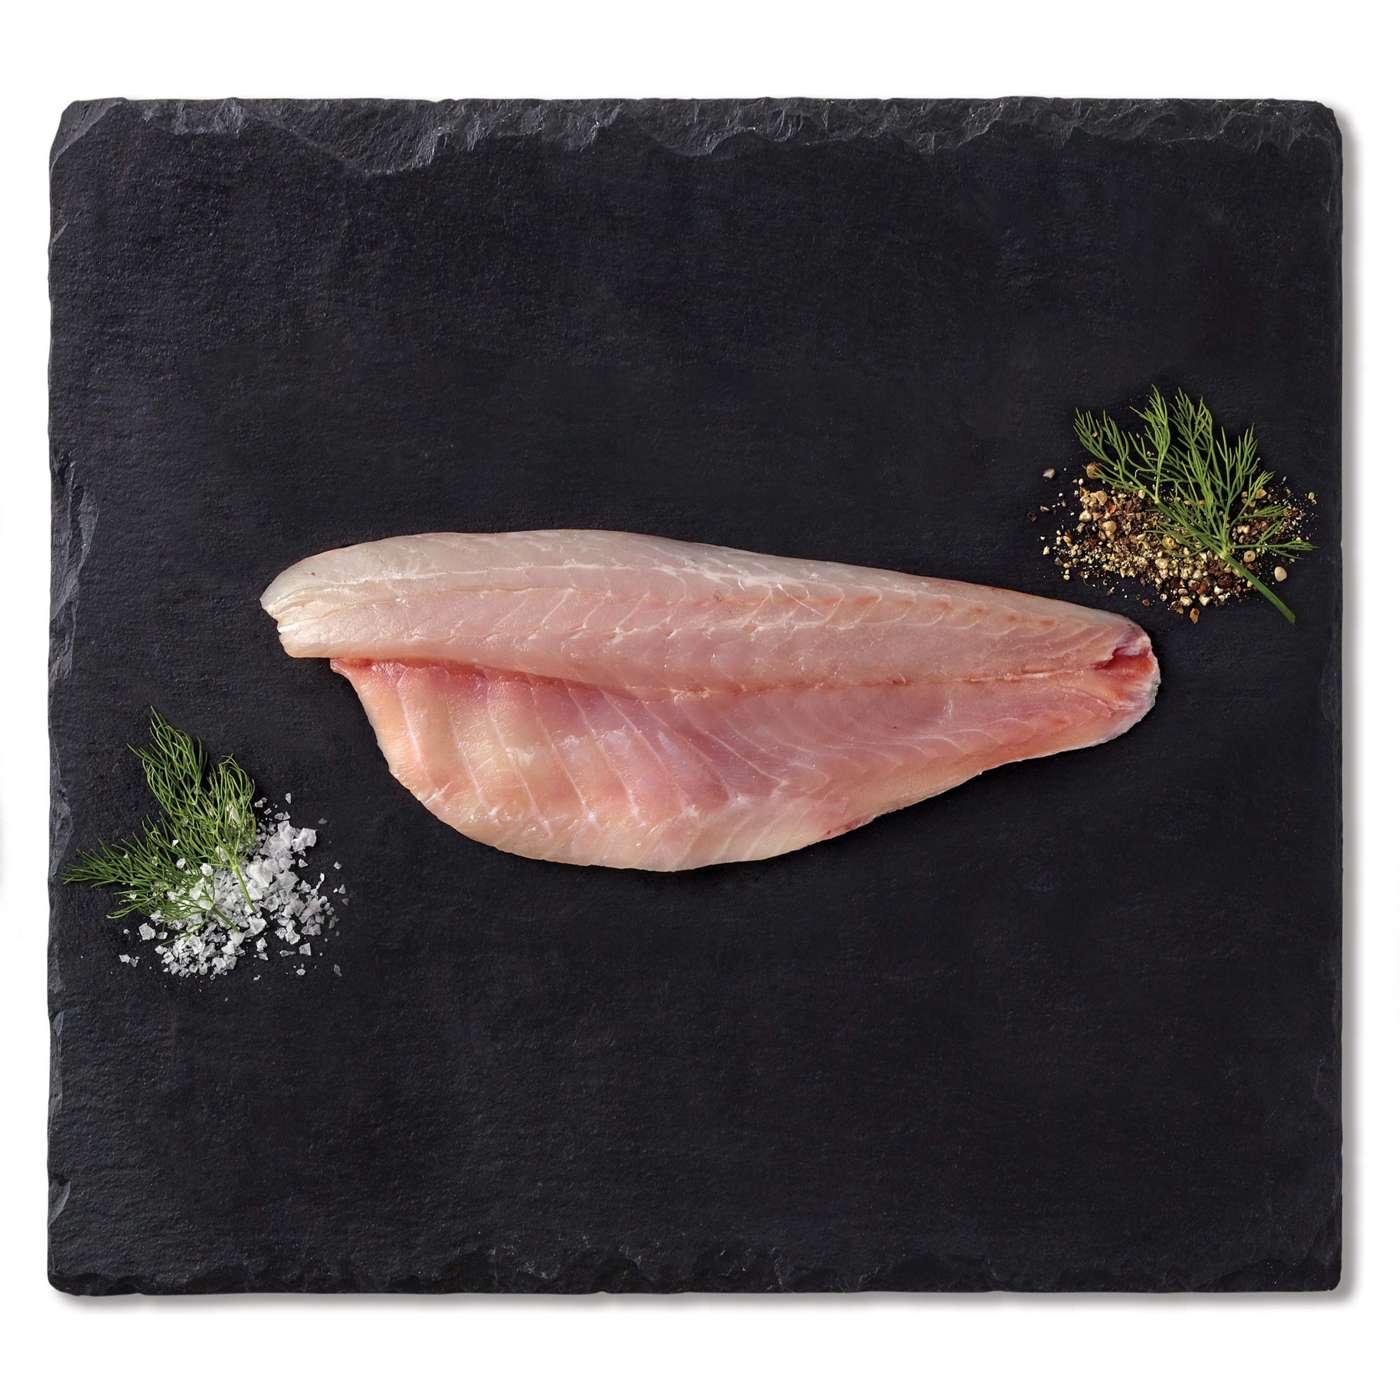 H-E-B Responsibly Raised Fresh Striped Bass Fillet; image 1 of 2